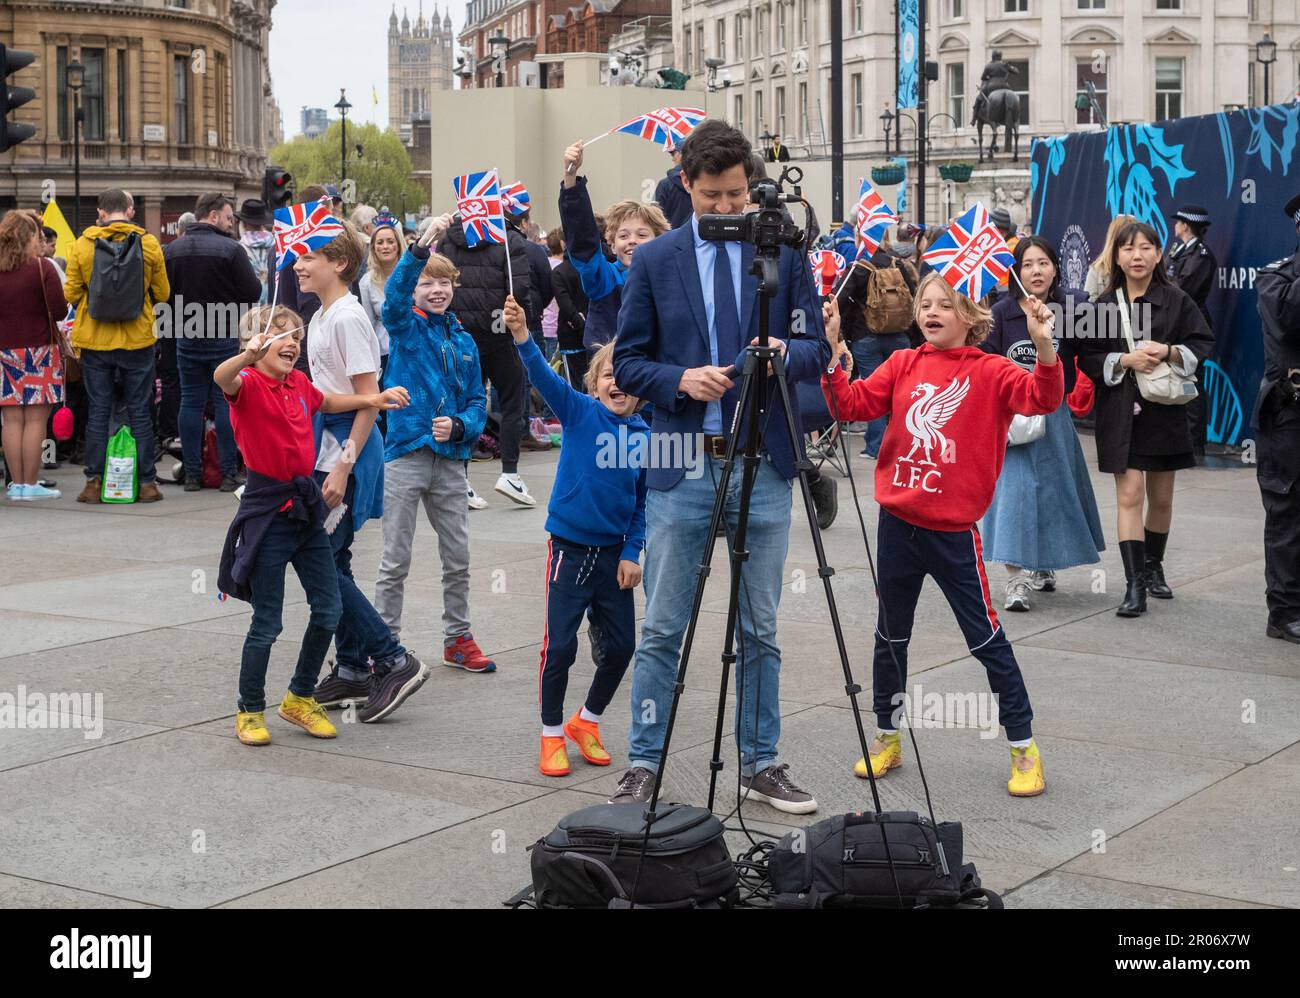 In the heart of London's Trafalgar Square, a news television reporter stands in front of his camera. Behind him, a group of young children dance and w Stock Photo